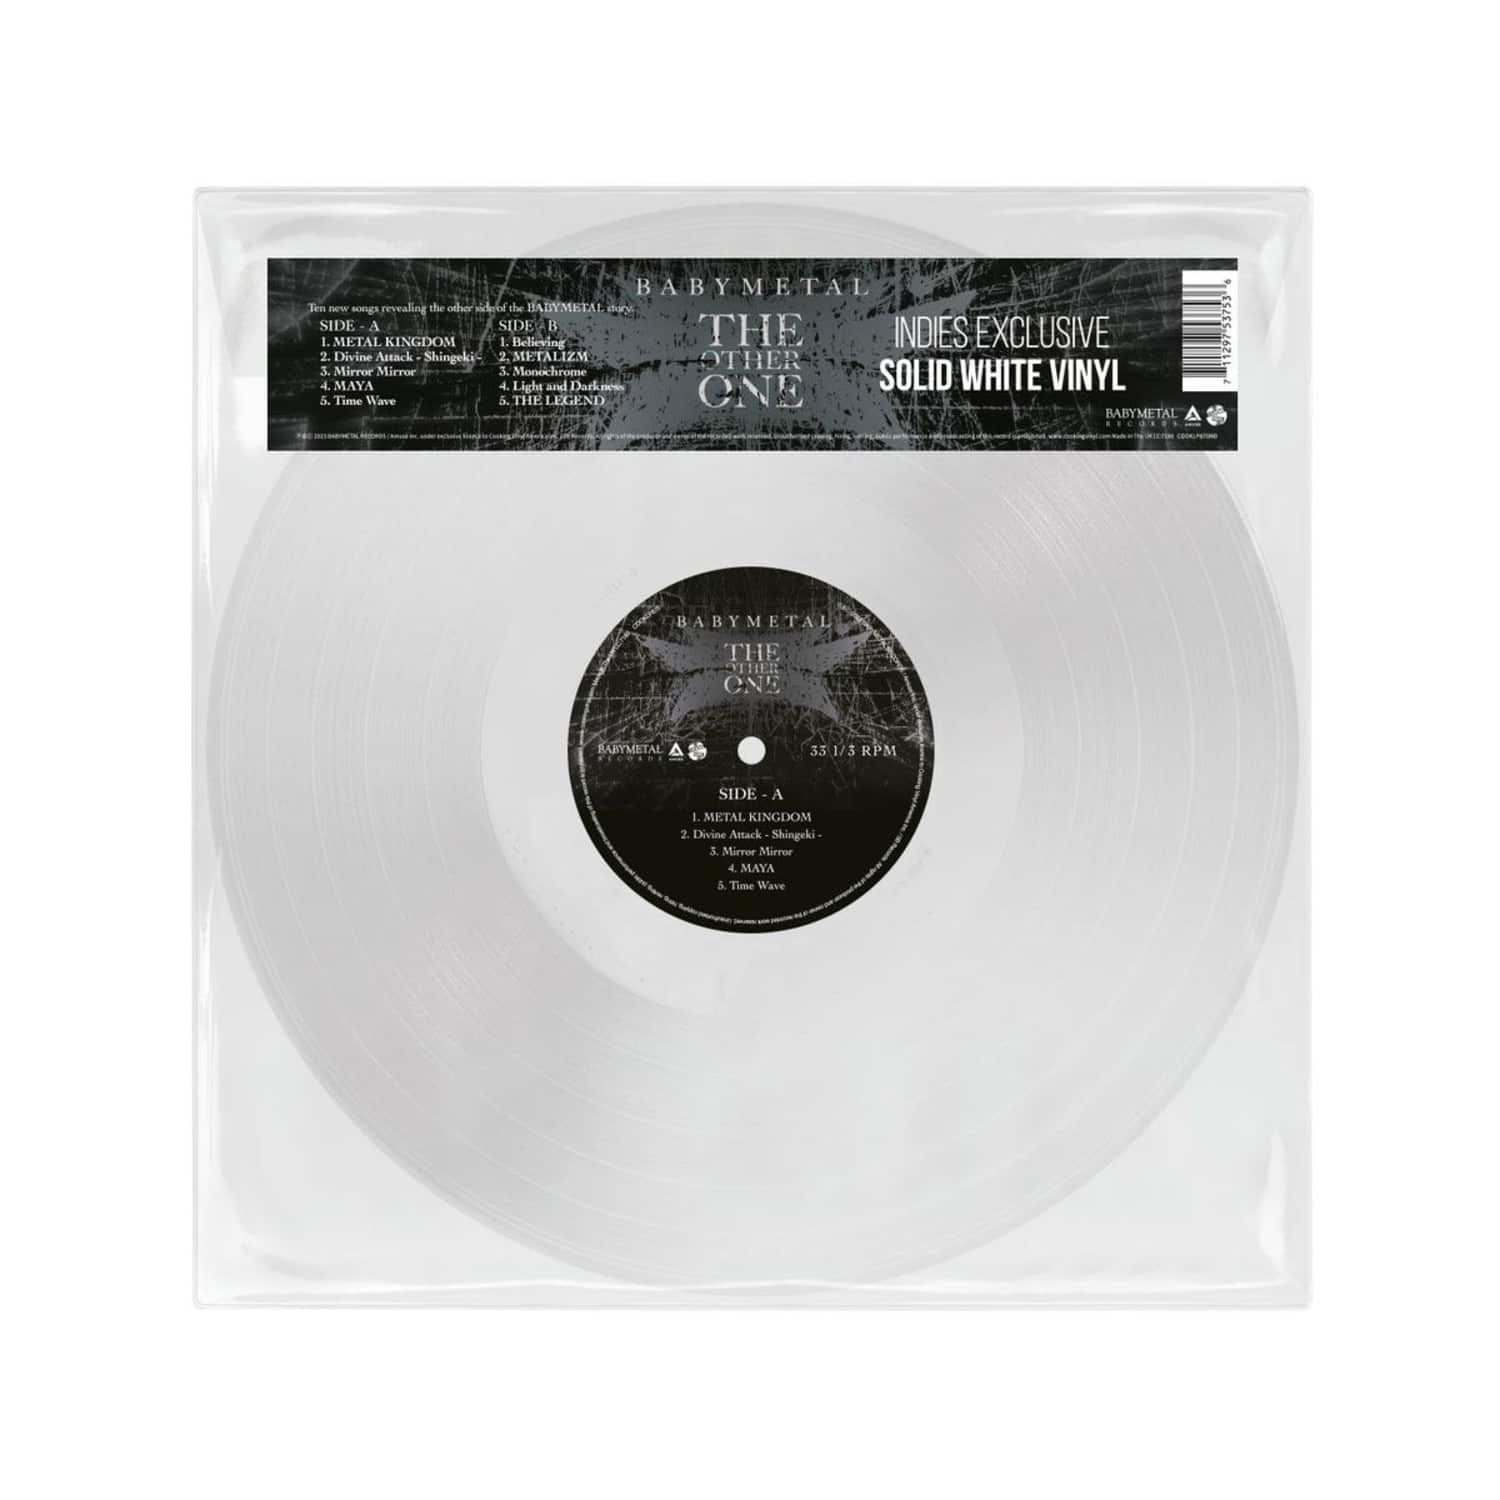 Babymetal - THE OTHER ONE-LTD WHITE COLORED 